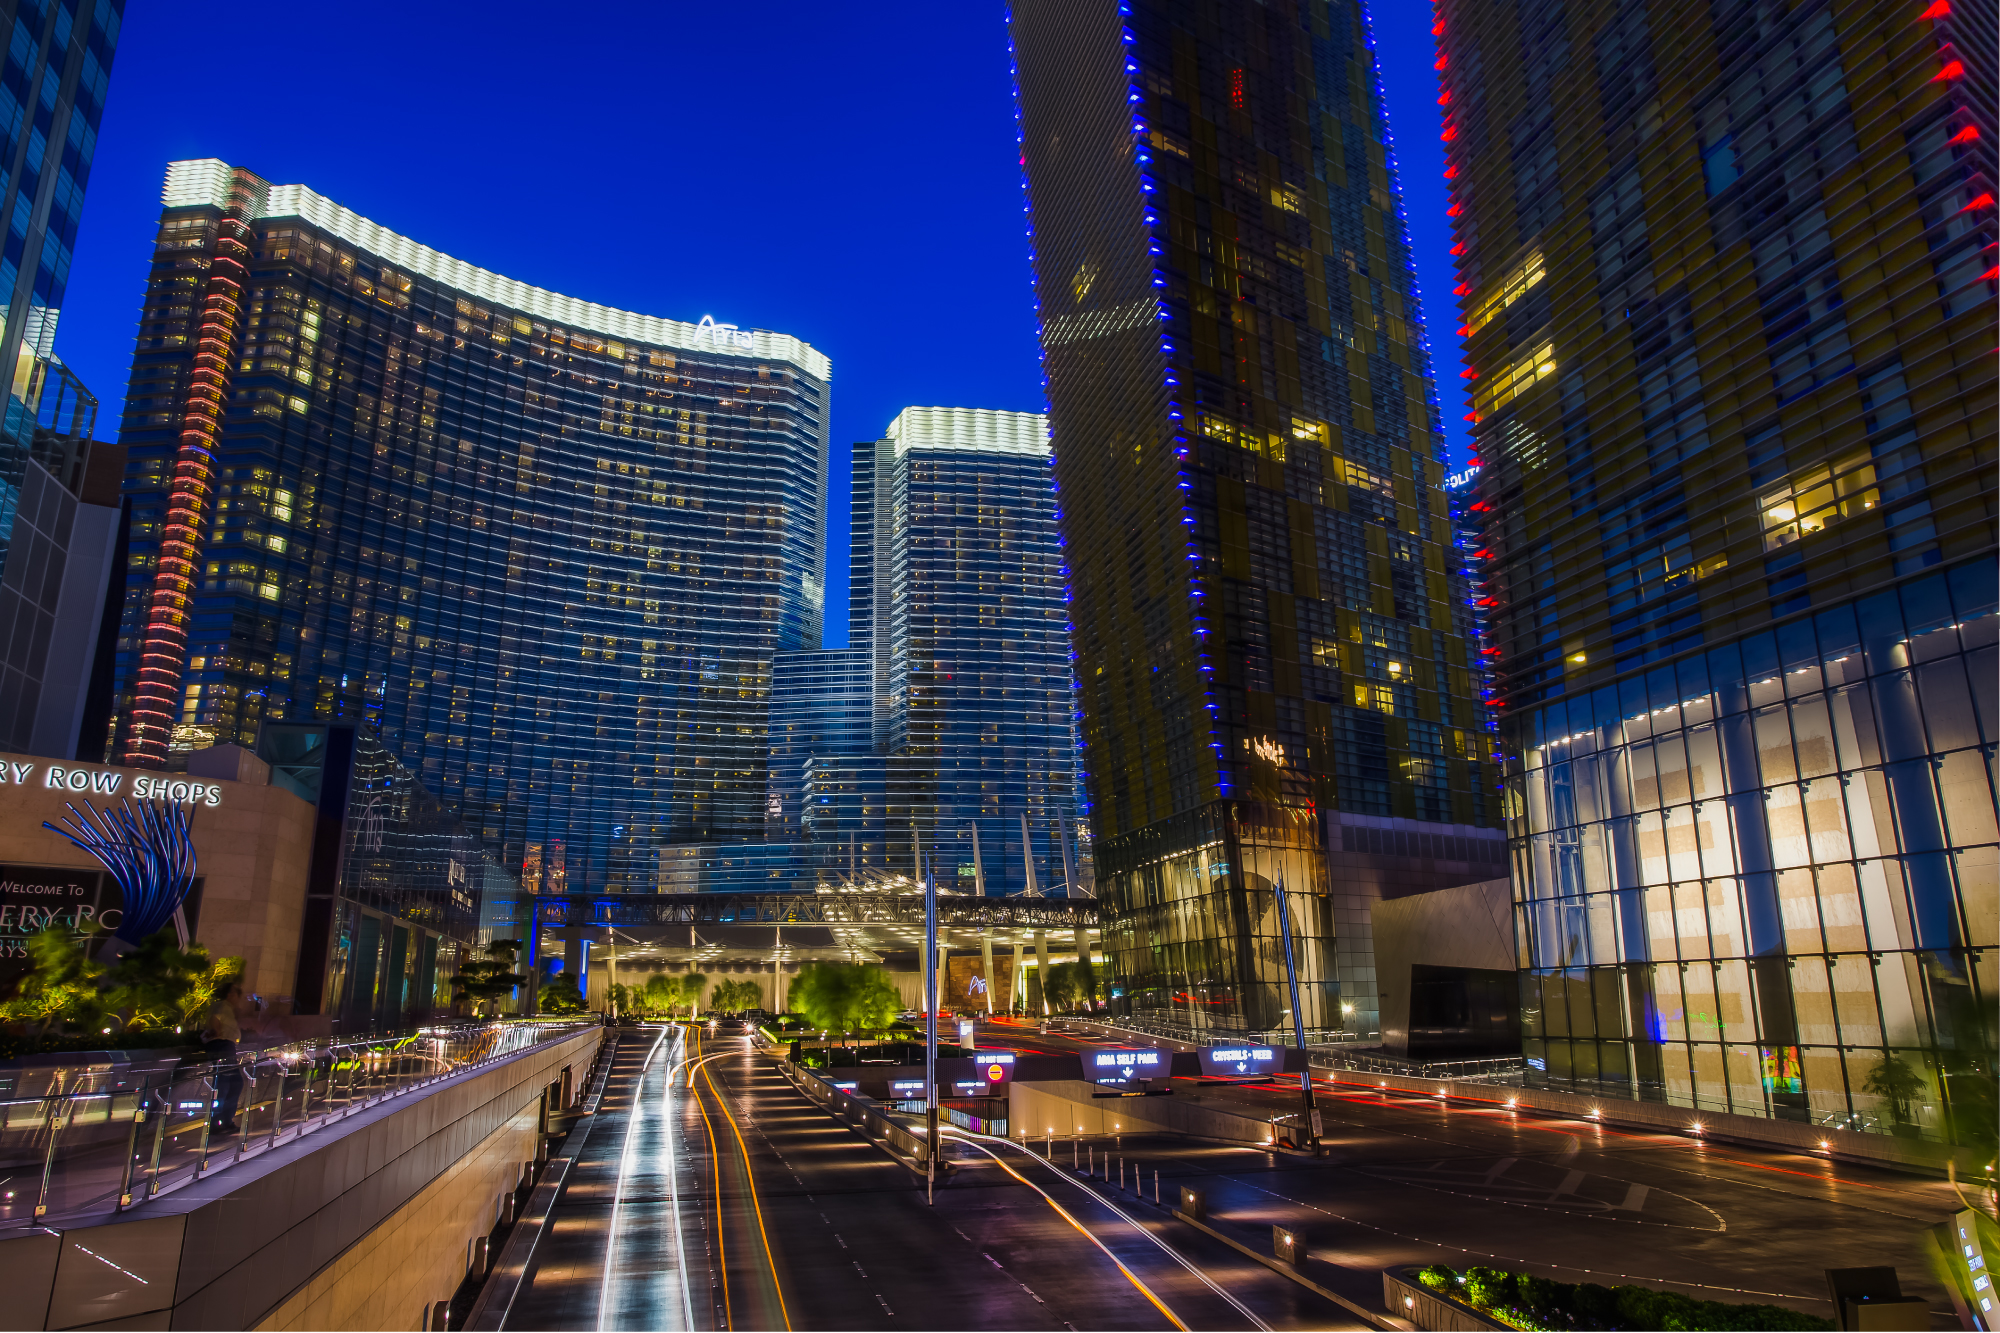 HDR Photography Workshop: Las Vegas Aria HDR | Pt.4 | RAW Processing and Photoshop Import